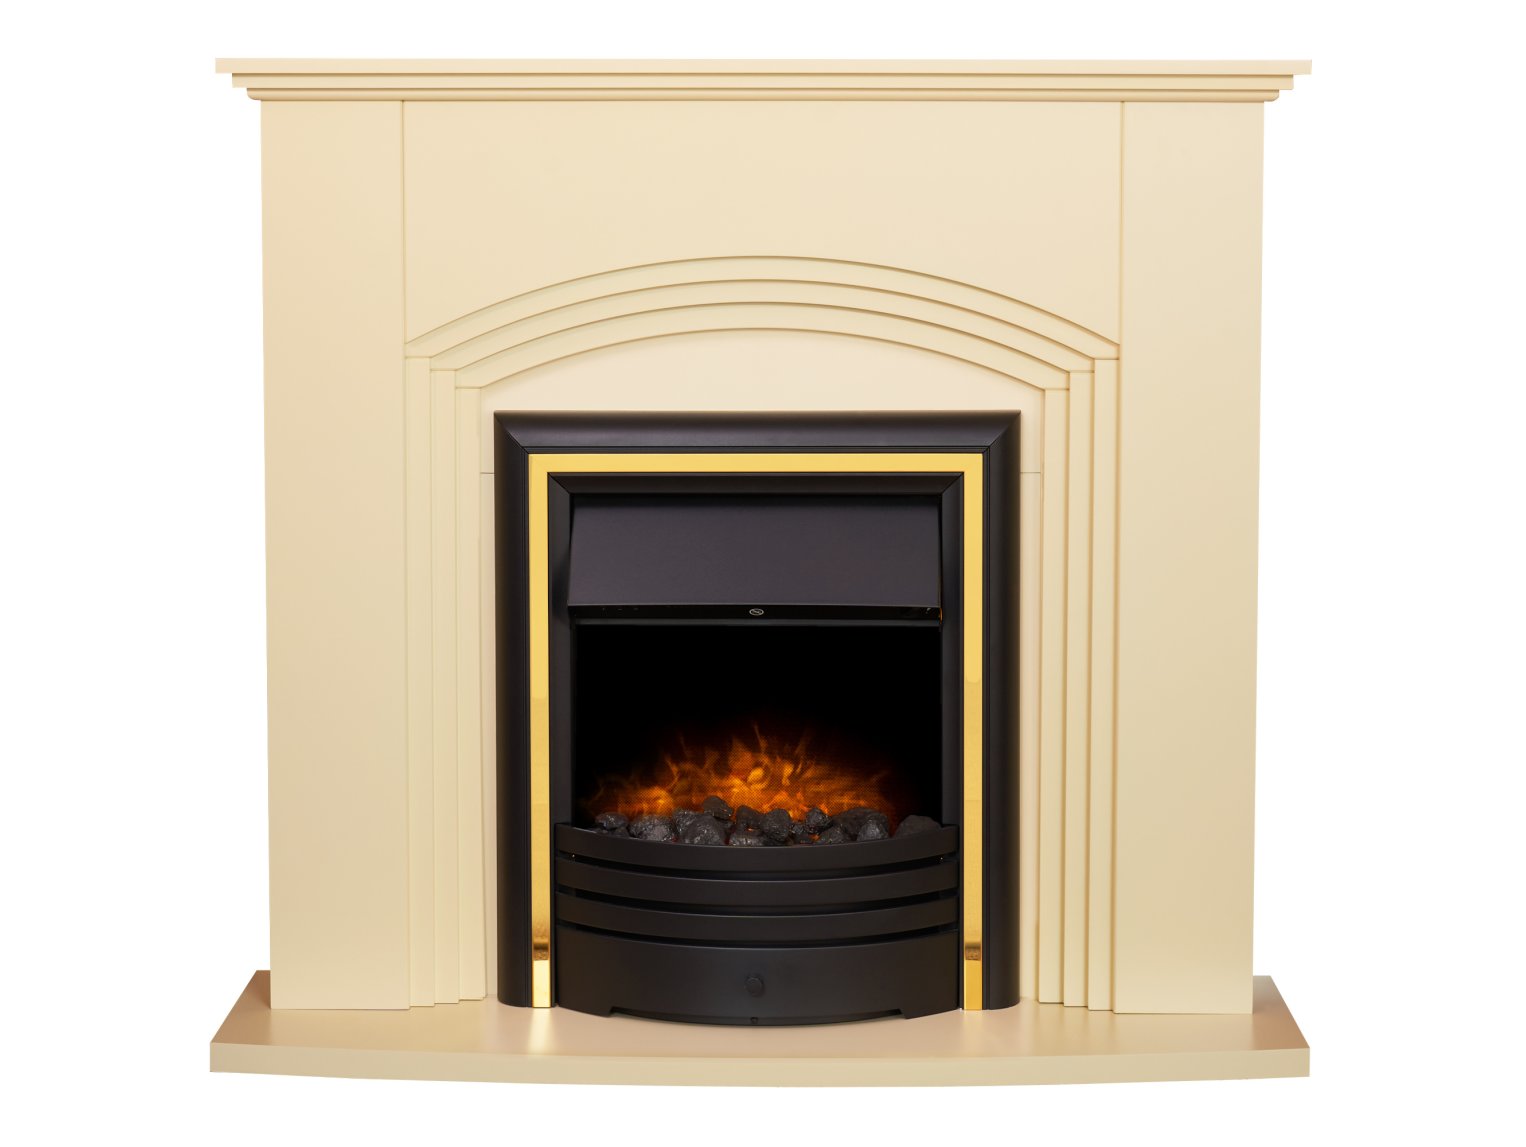 Adam Kirkdale Fireplace in Cream with Cambridge 6-in-1 Electric Fire in Black, 45 Inch